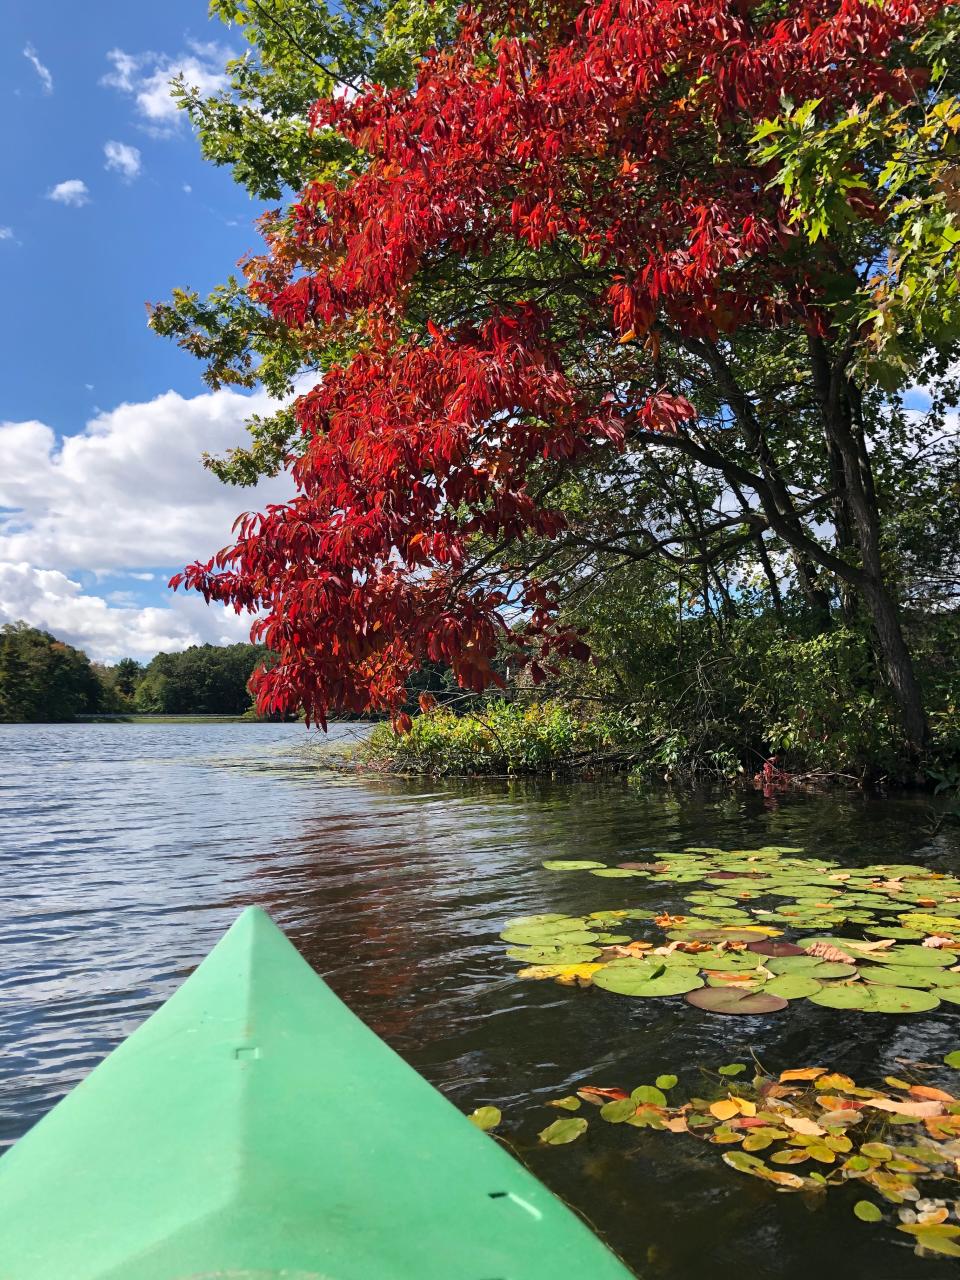 Fall colors strike the shore of an island on Hall Lake last week in Michigan's Yankee Springs Recreation Area.